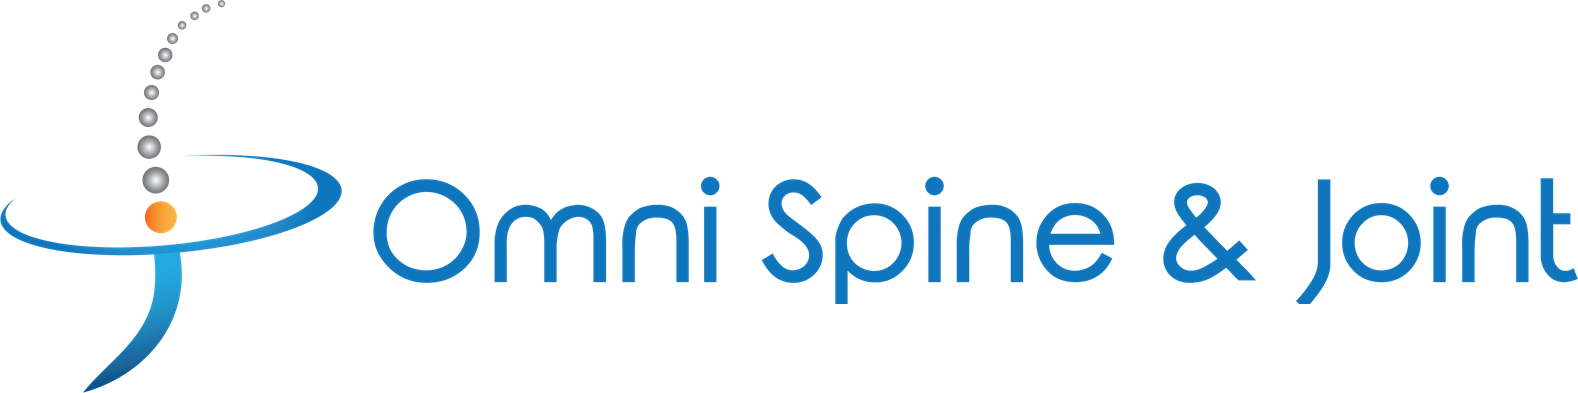 Omni Spine & Joint